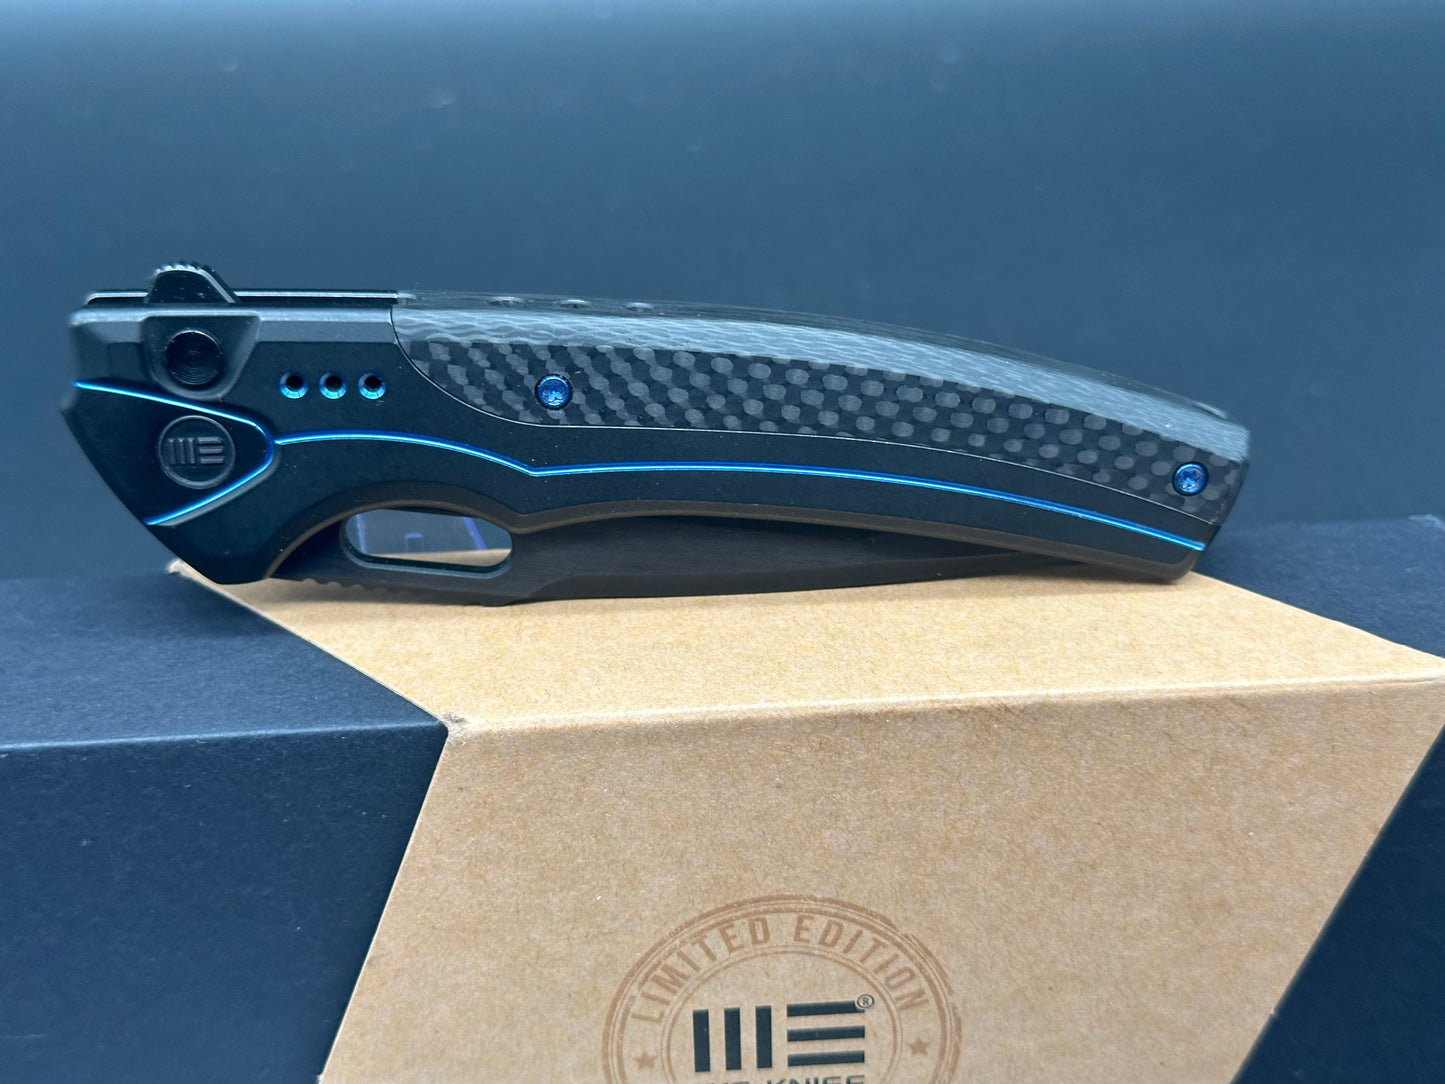 WE Knife Co. Exciton Limited Edition Knife Black Ti/CF (3.7" Black)